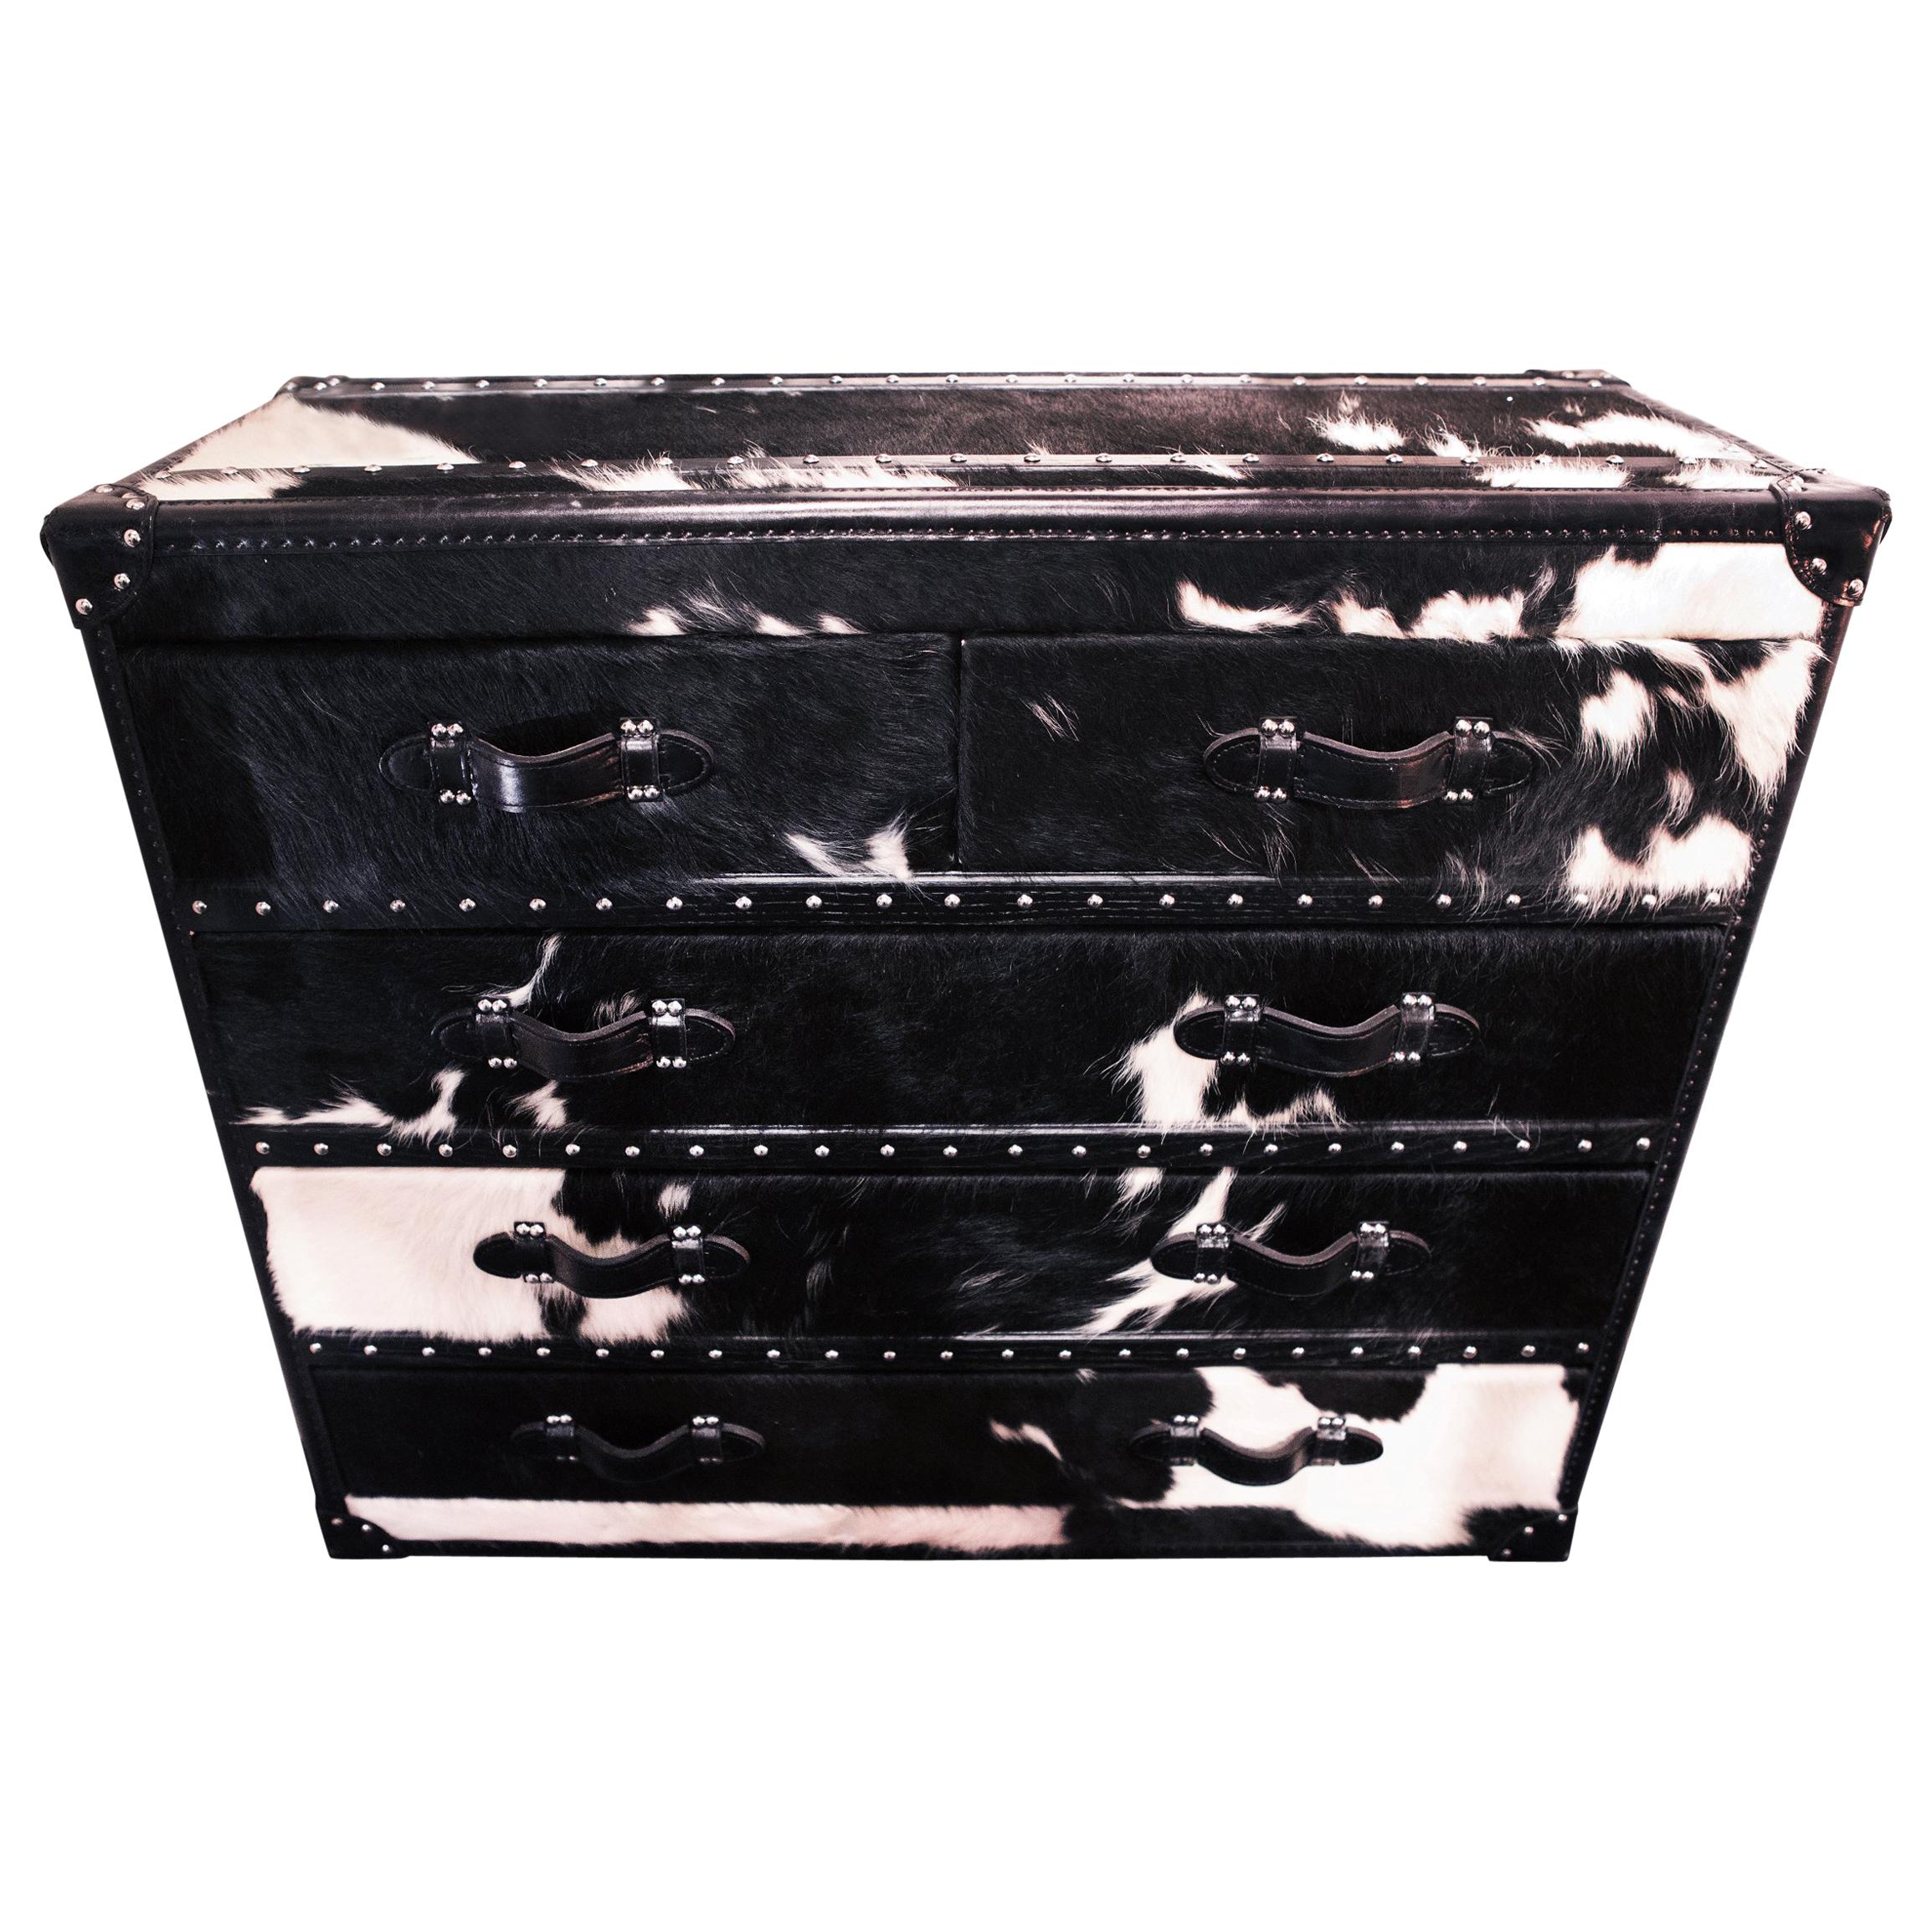 Wild Black and White Cowhide High Chest For Sale